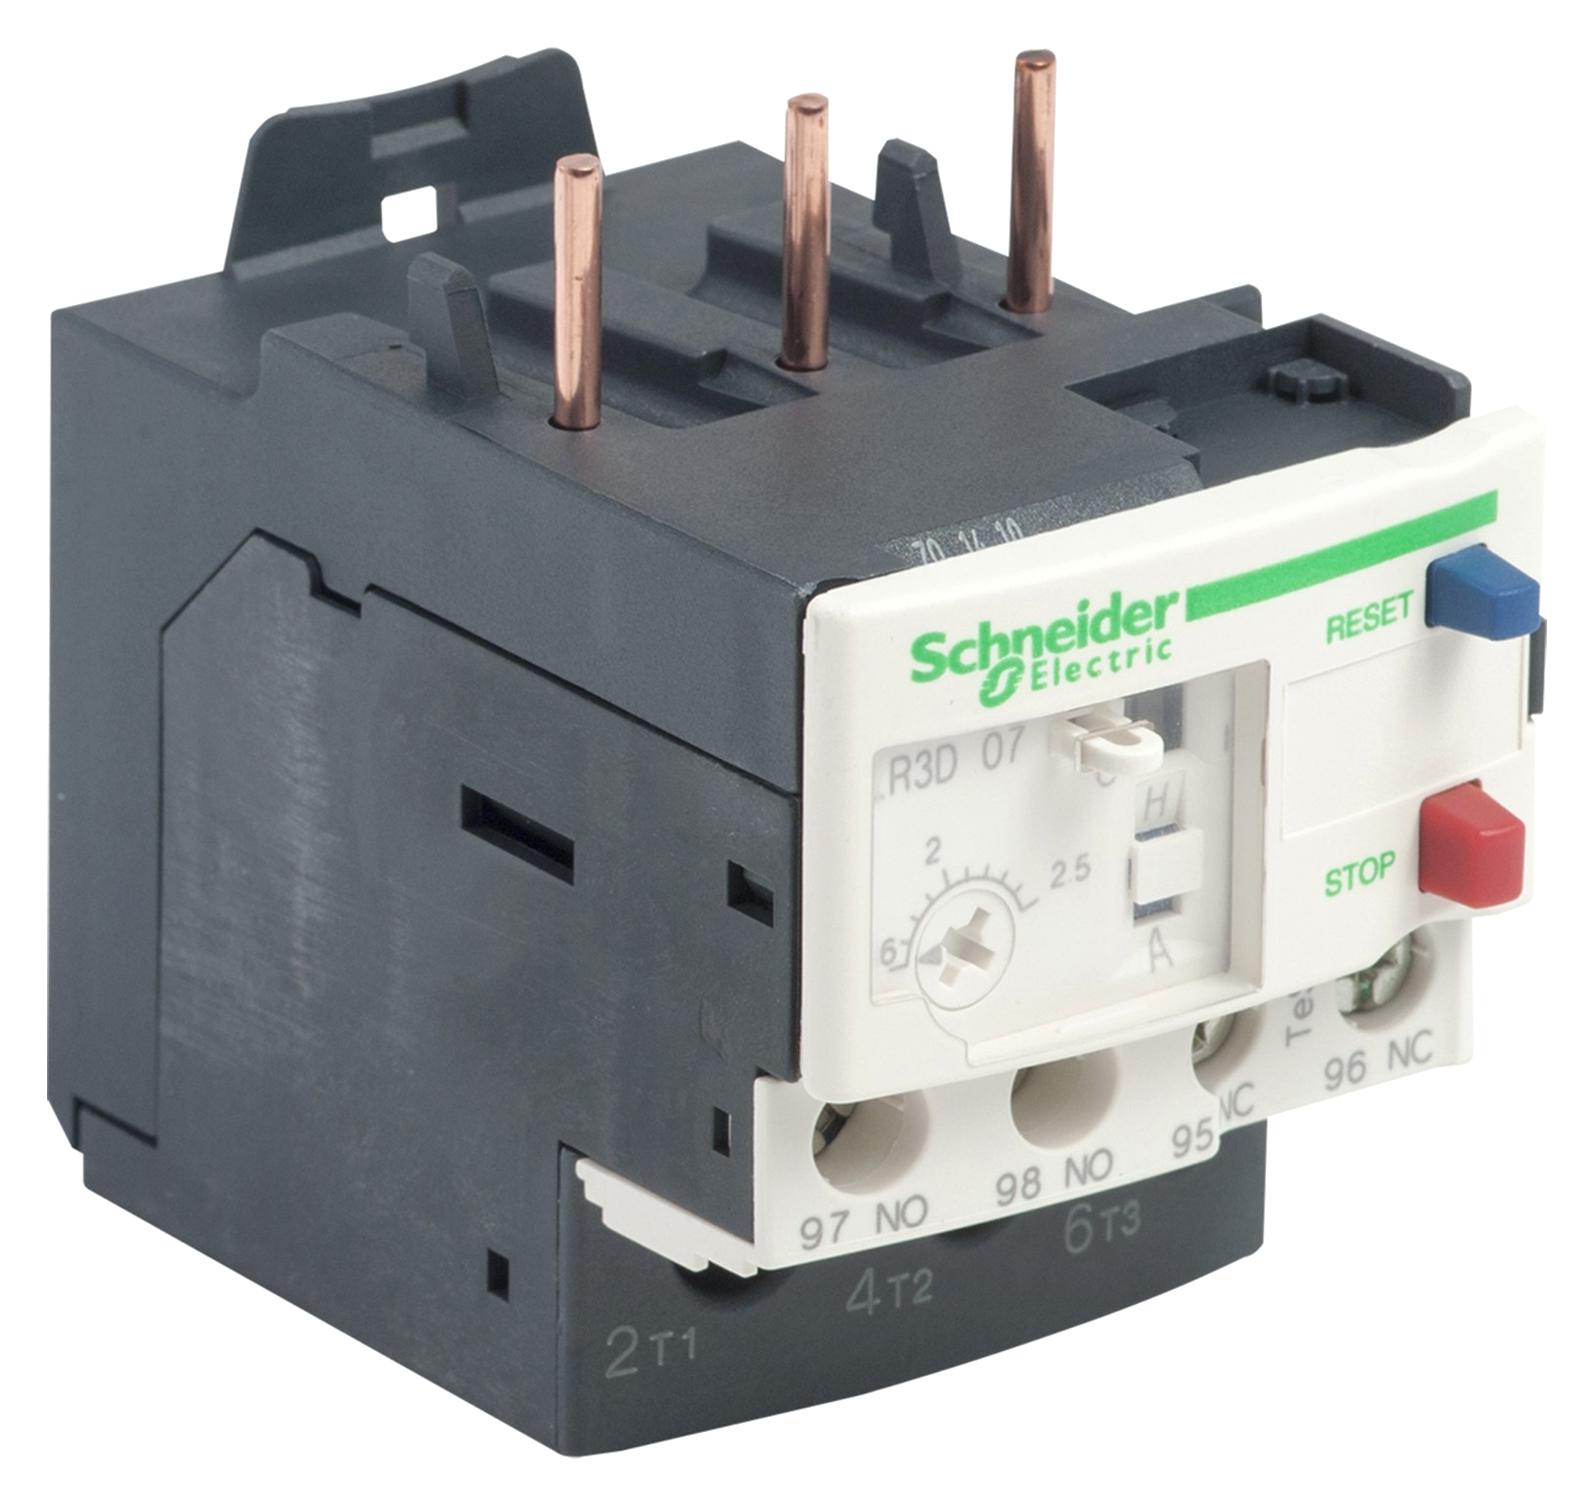 LR3D07 THERMAL OVERLOAD RELAY, 1.6A-2.5A, 690V SCHNEIDER ELECTRIC